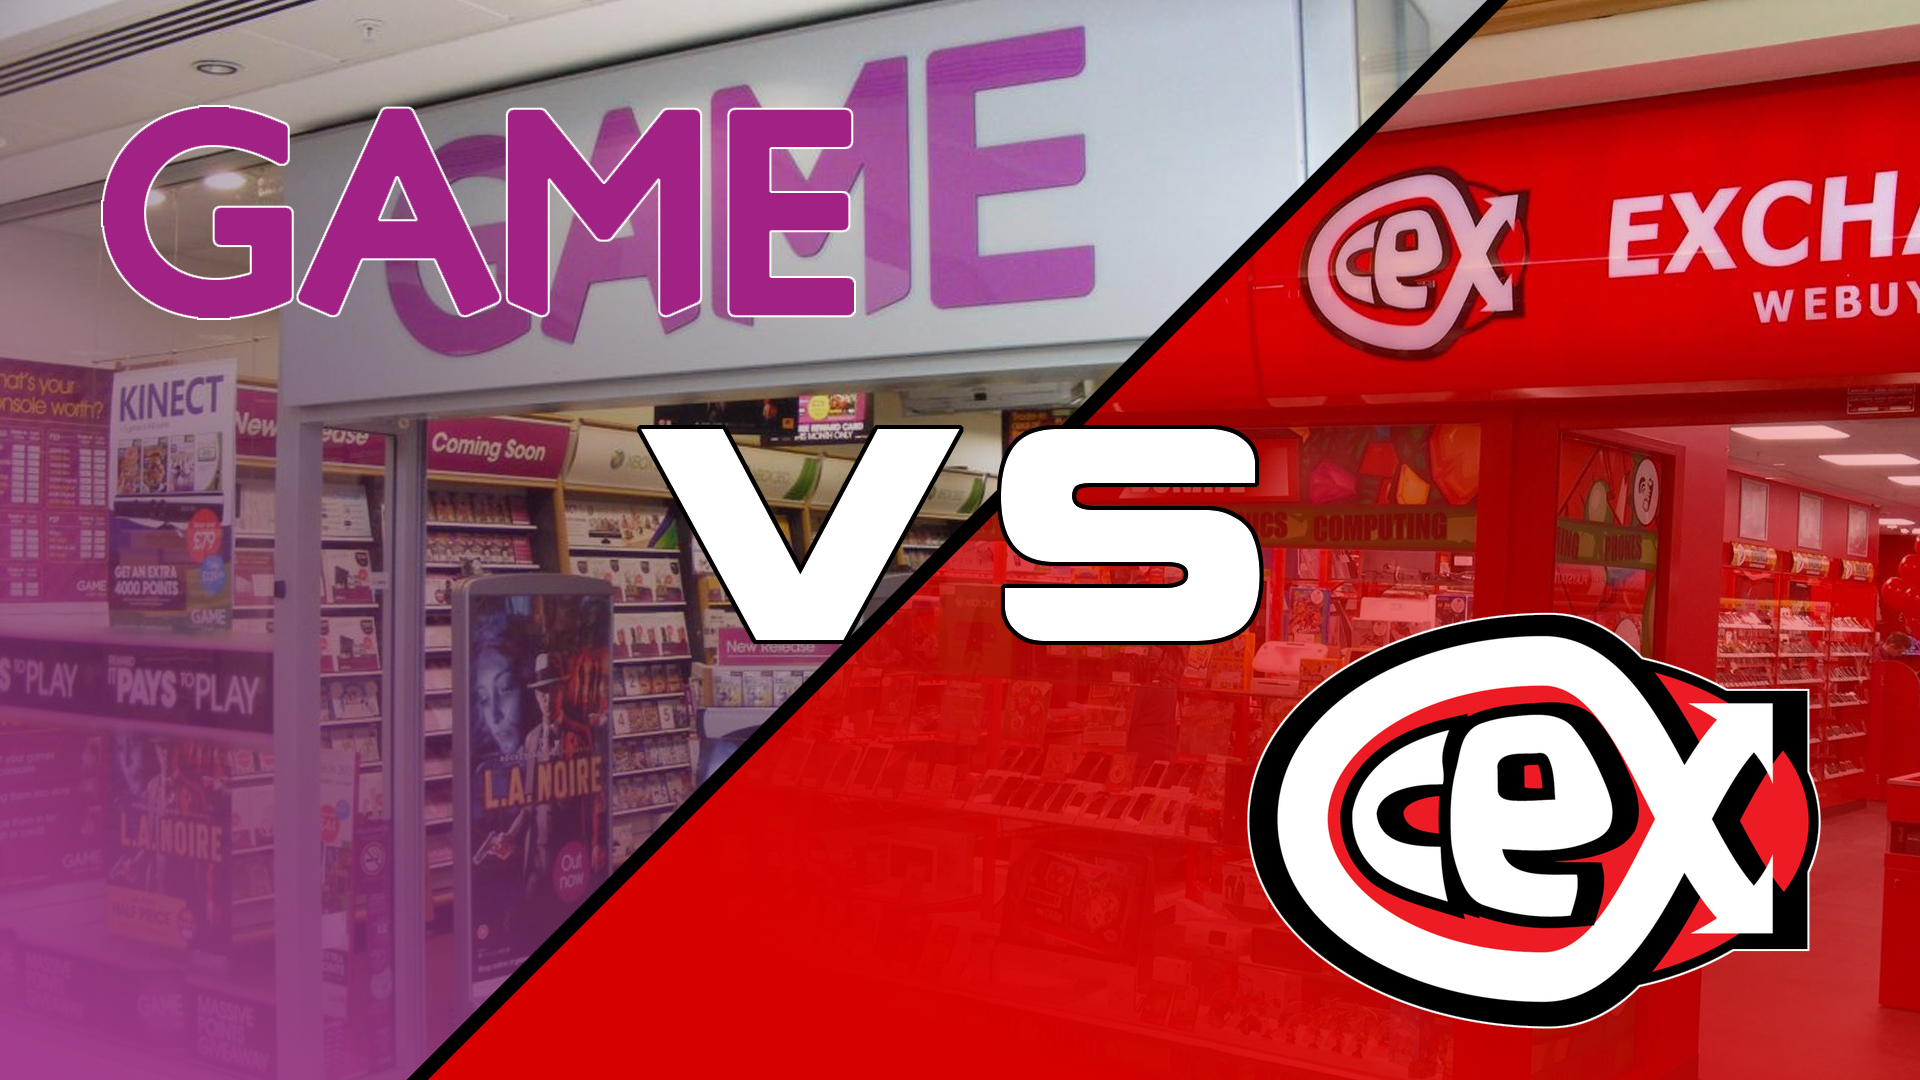 Visit a Game or CEX Store to Repair Discs.